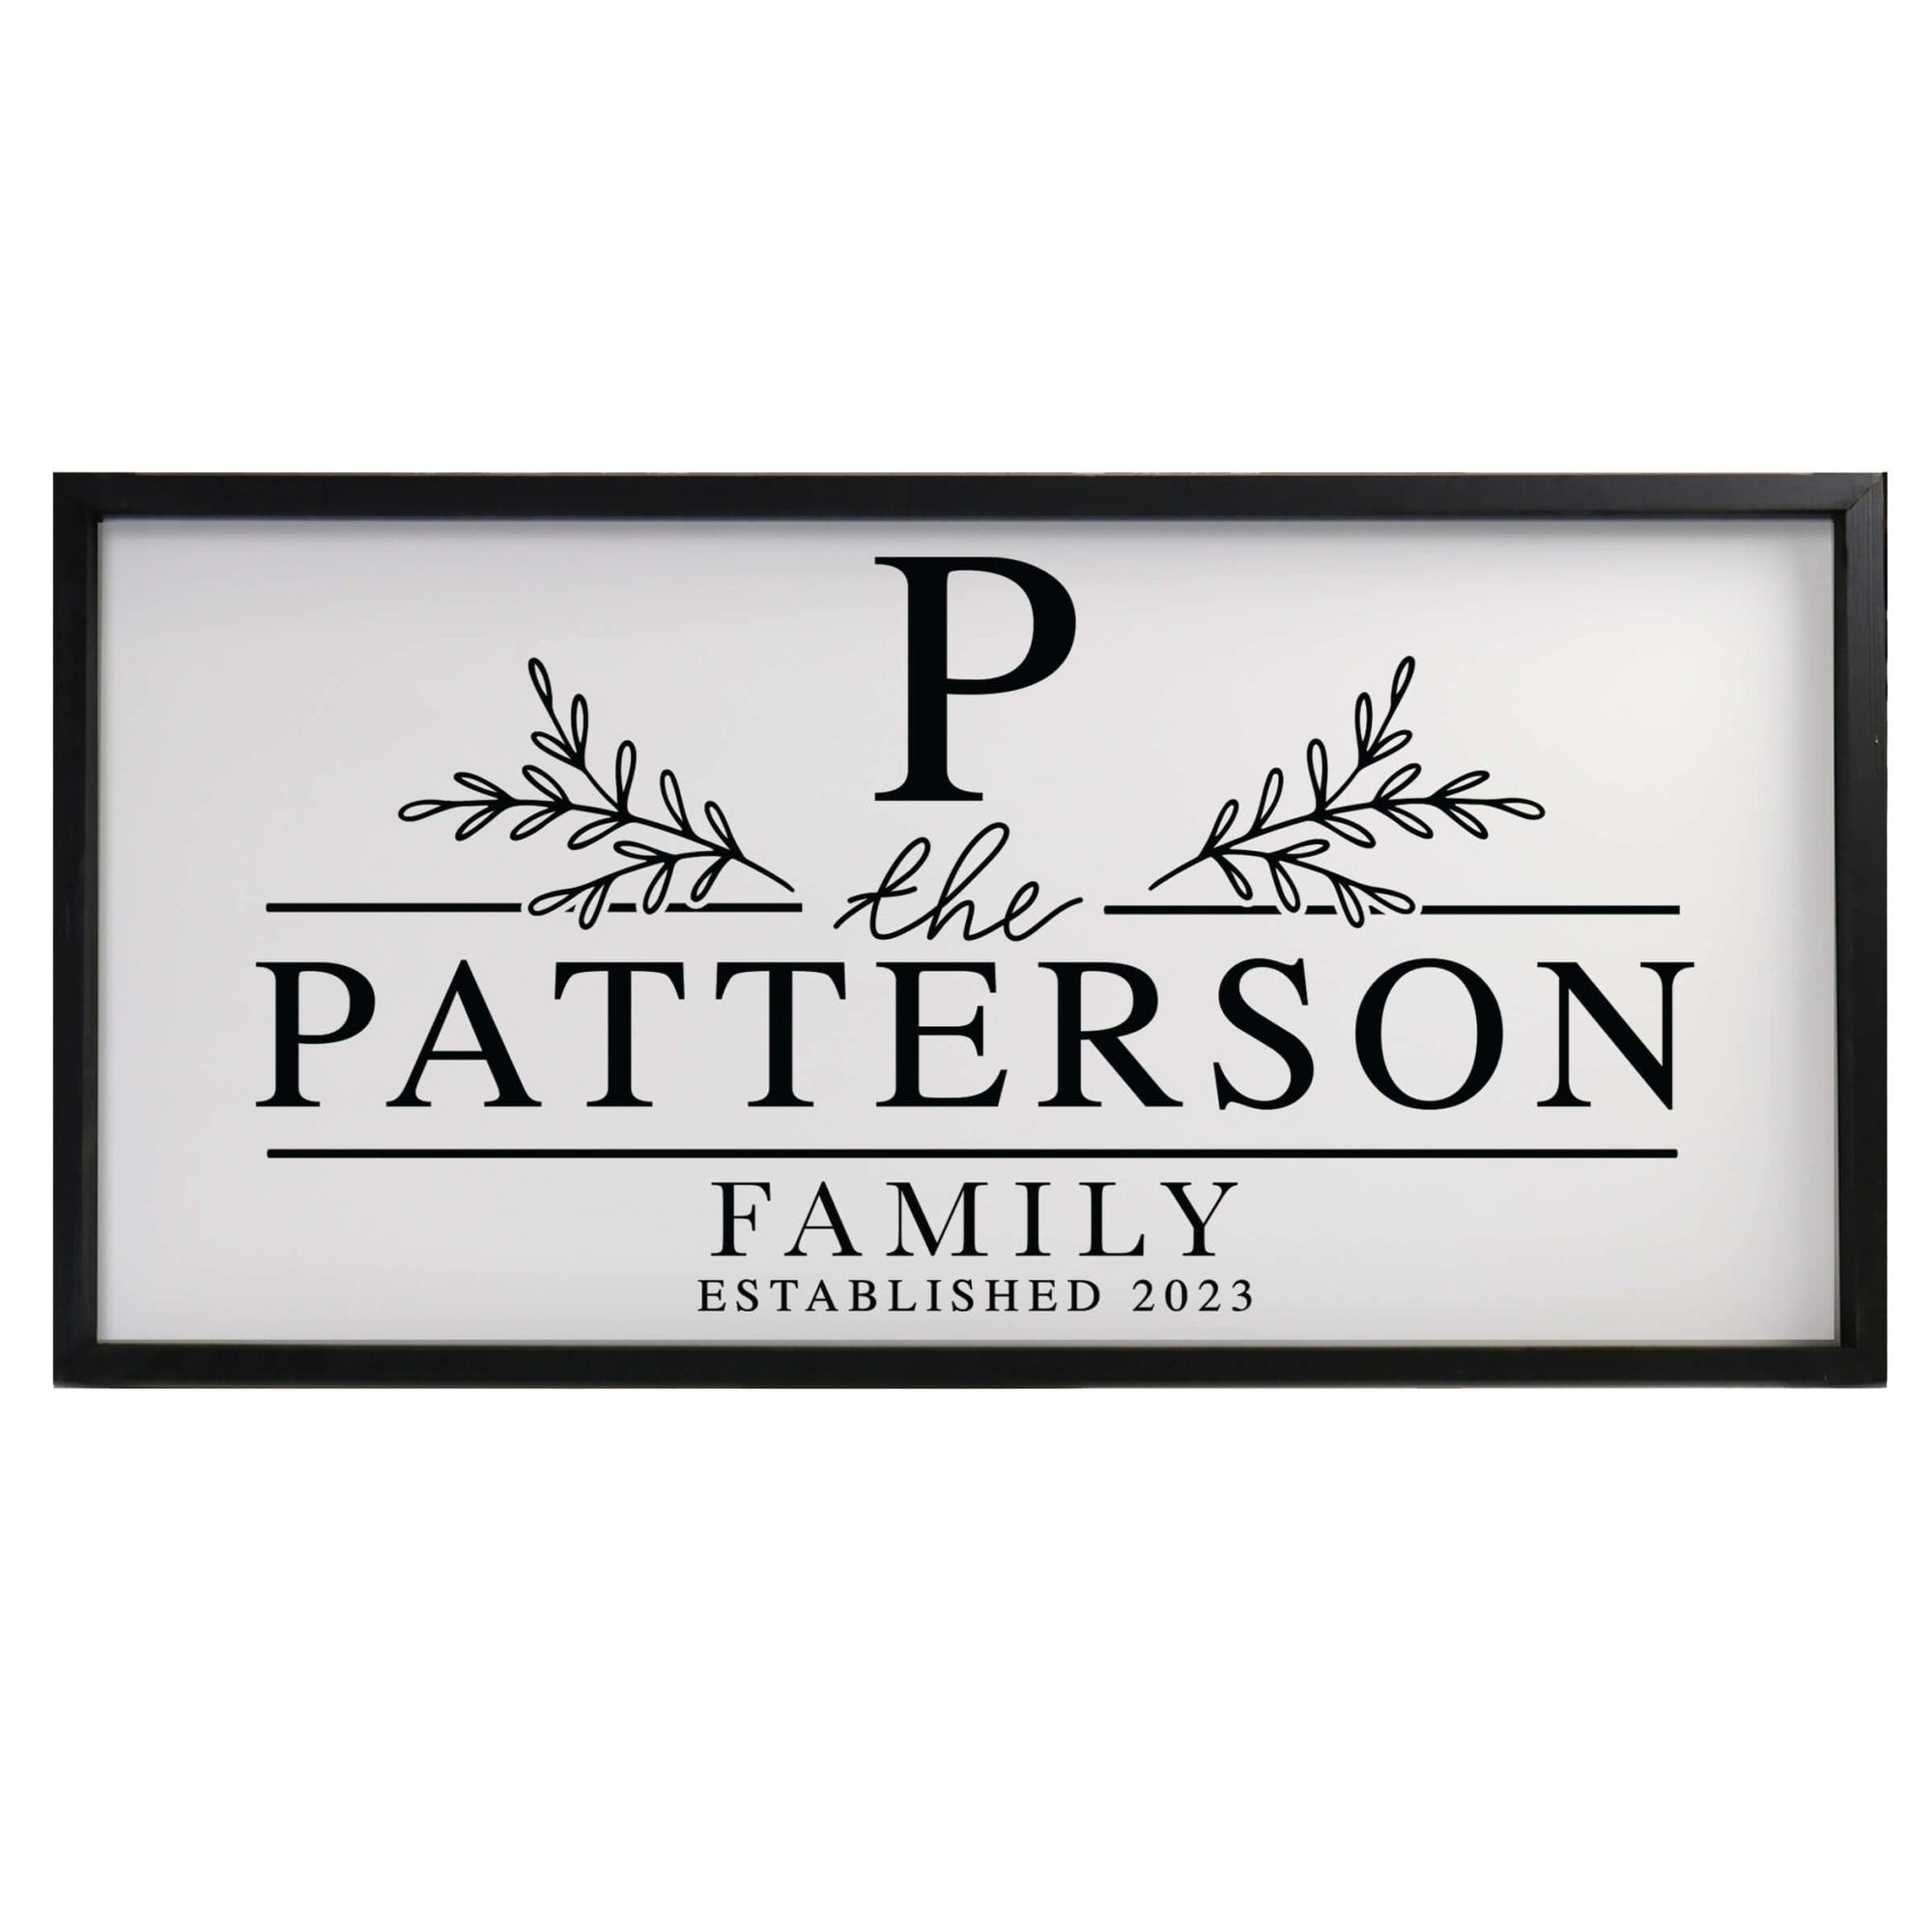 Custom Printed Family Wall Hanging Framed Shadow Box For Home Décor Ideas - Patterson Family - LifeSong Milestones